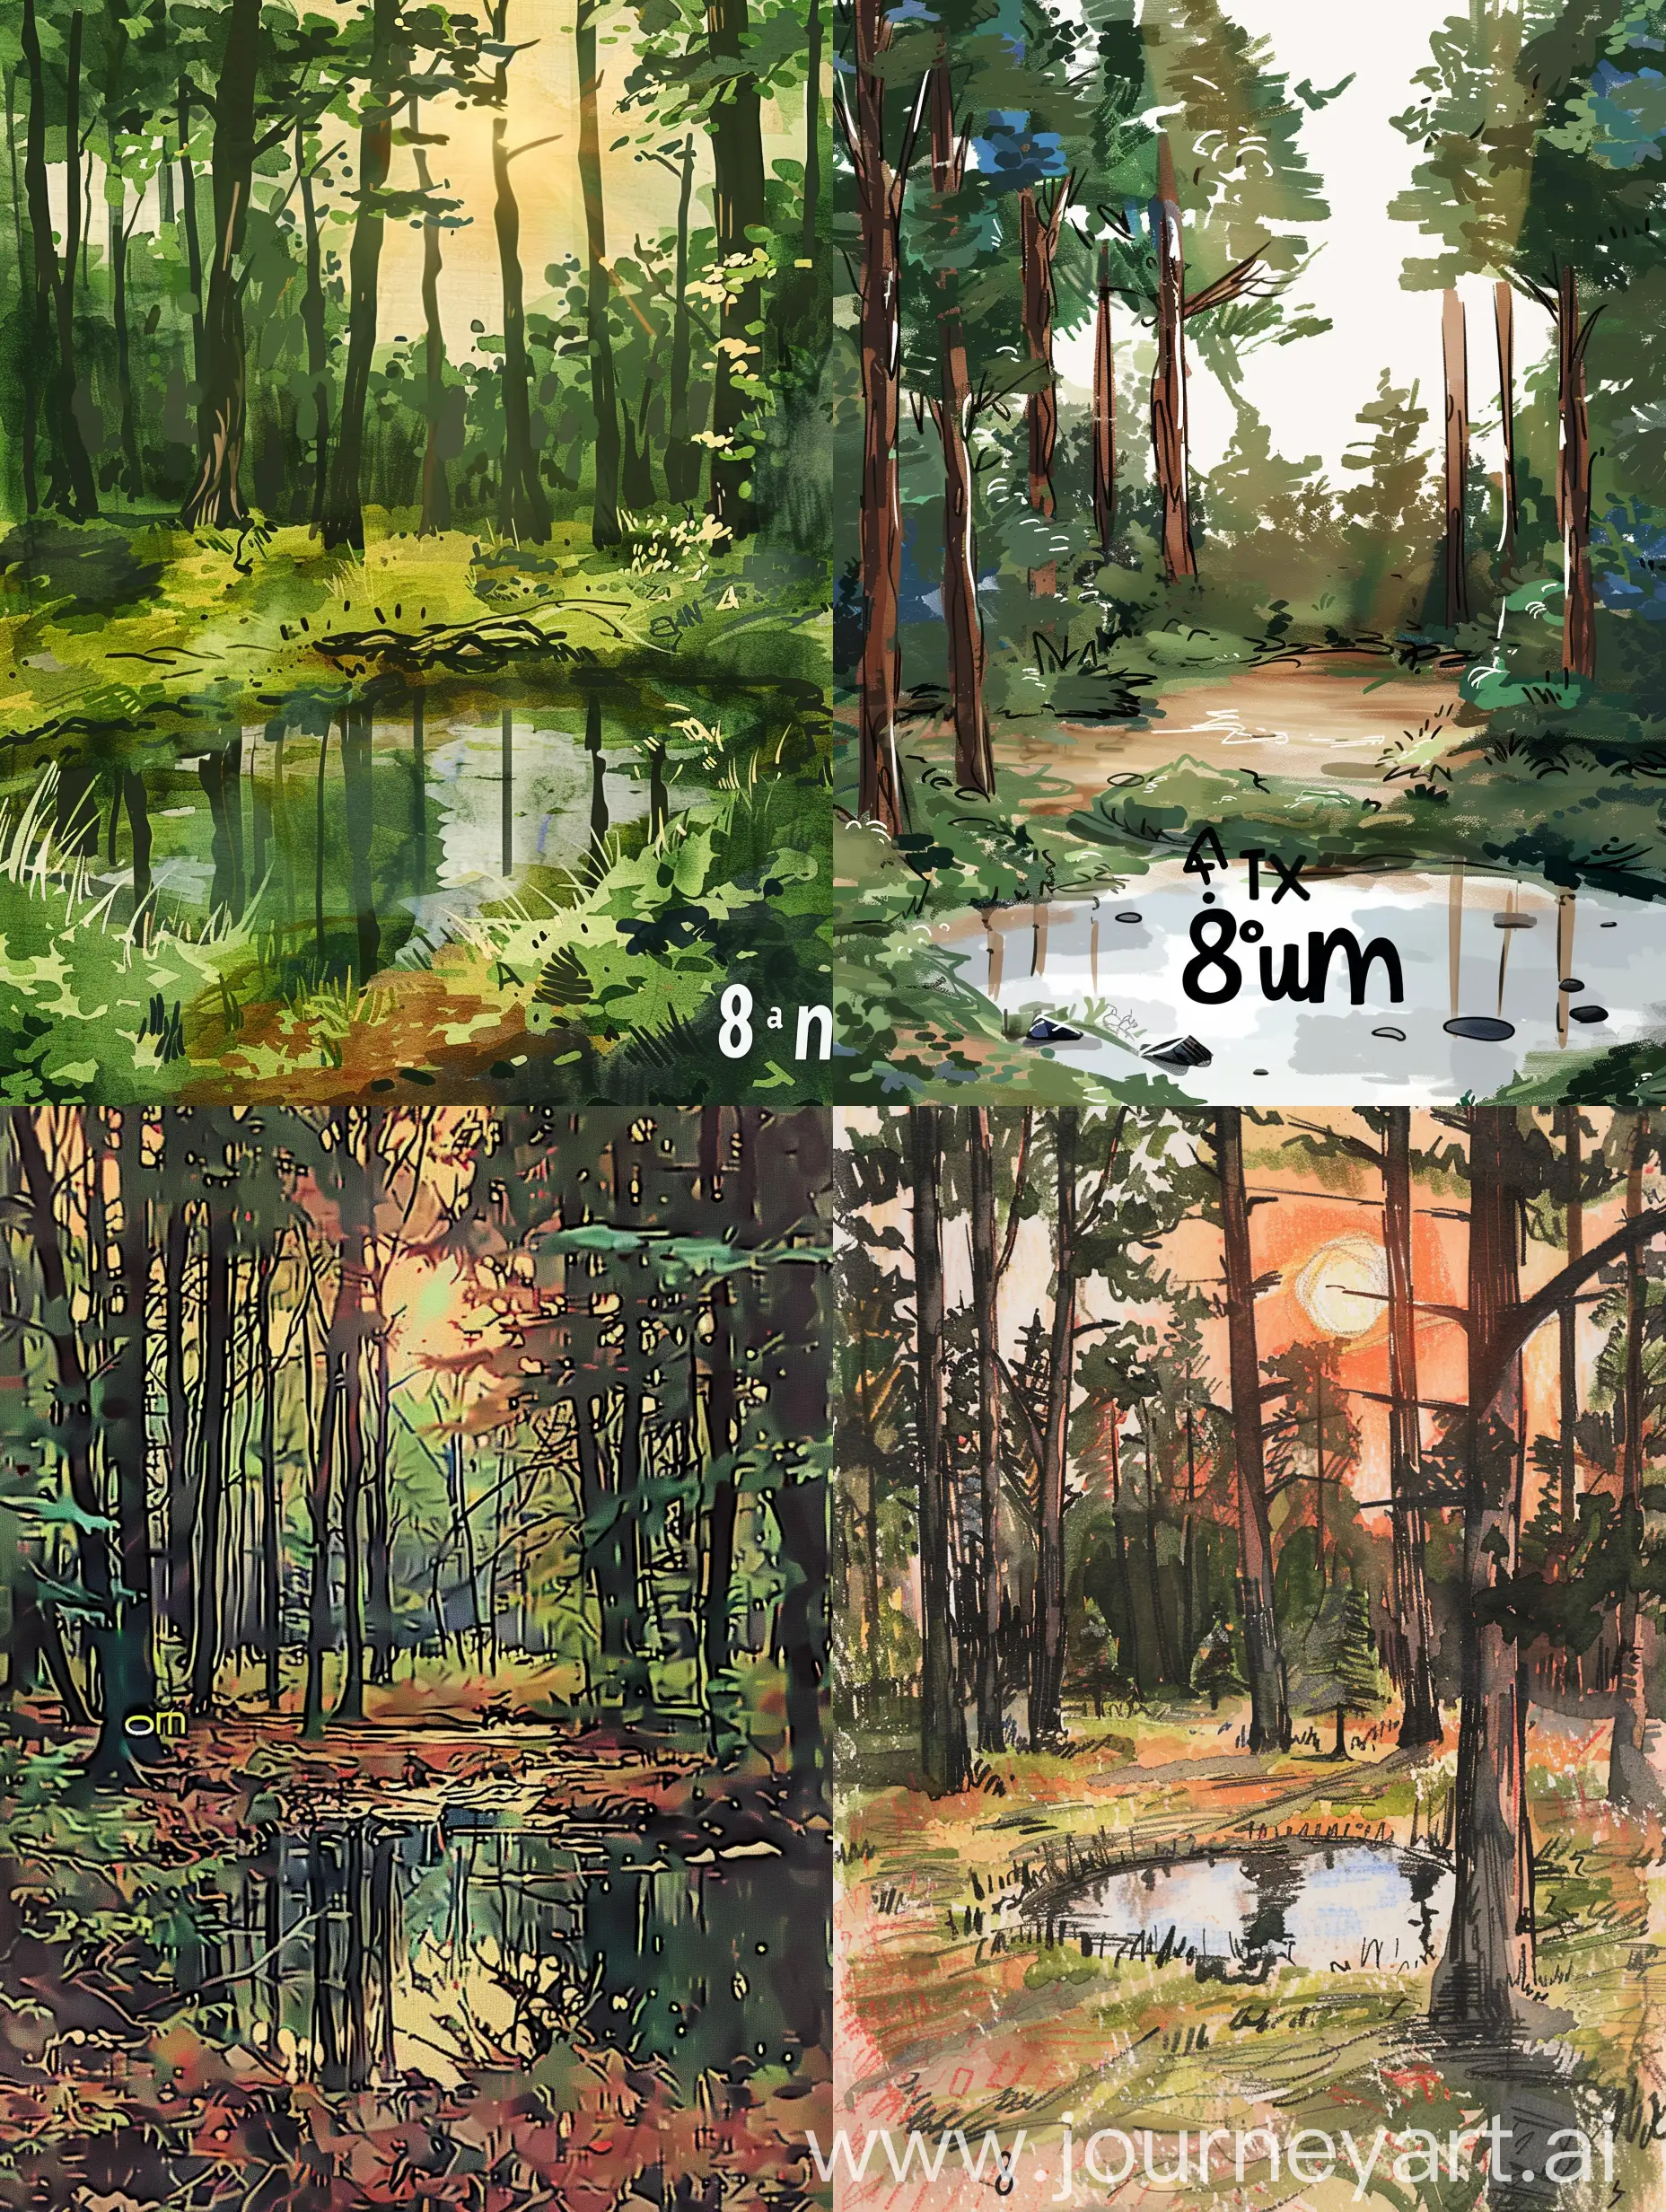 Generate an image of a forest sketch with colors, small pond, showing the time around 8am
